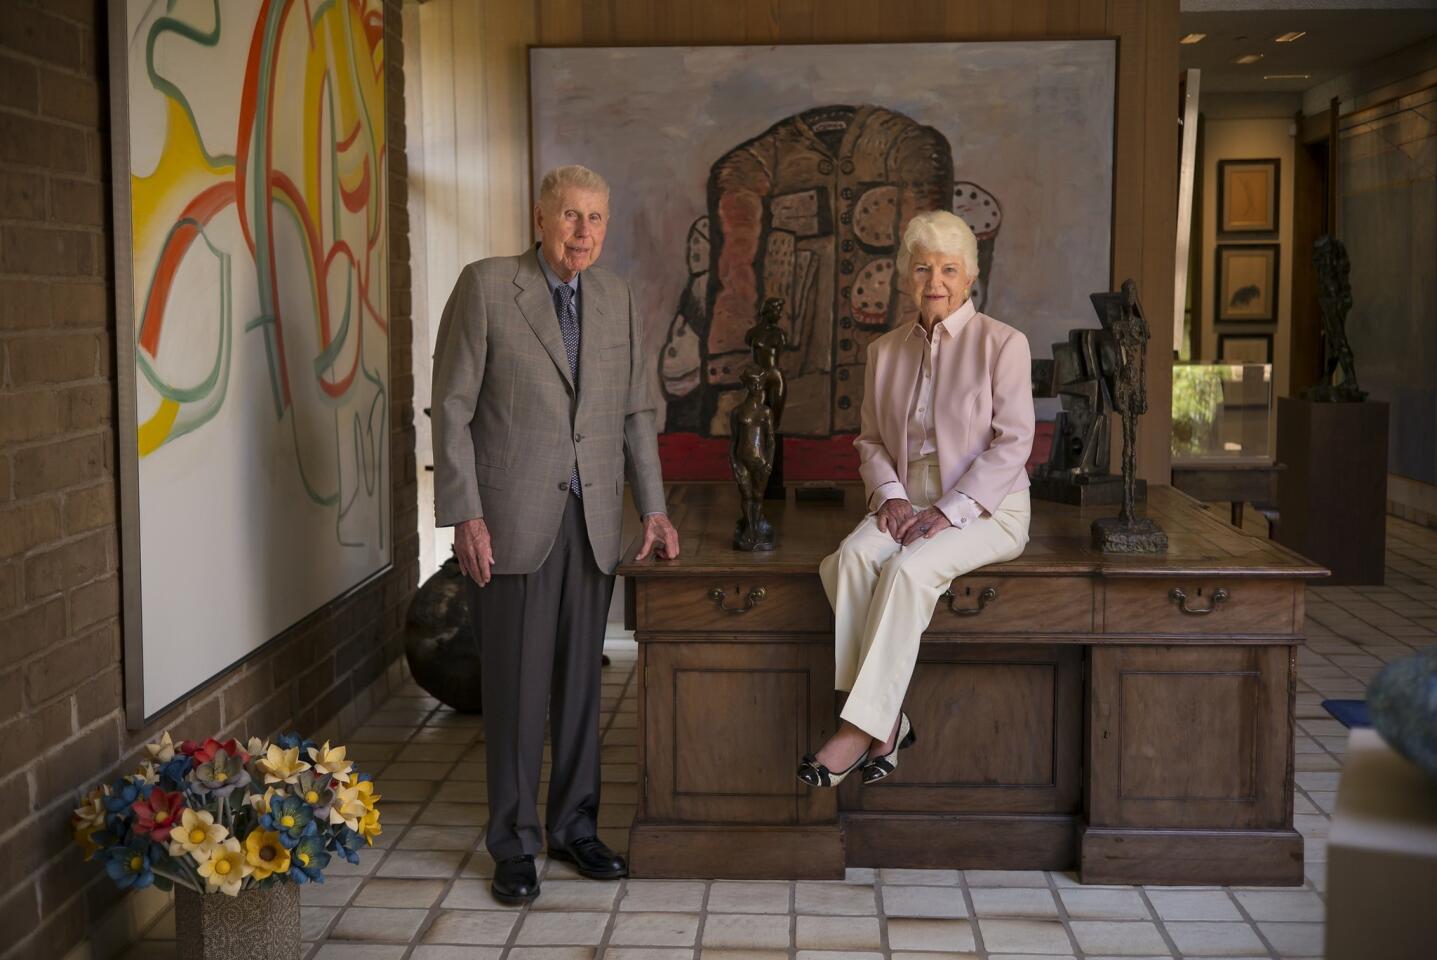 Harry "Hunk" and Mary "Moo" Anderson pose in the foyer of their home with two paintings in the background. The Willem DeKooning, left, and Philip Guston, directly behind them, are both part of a collection they are donating to Stanford University.